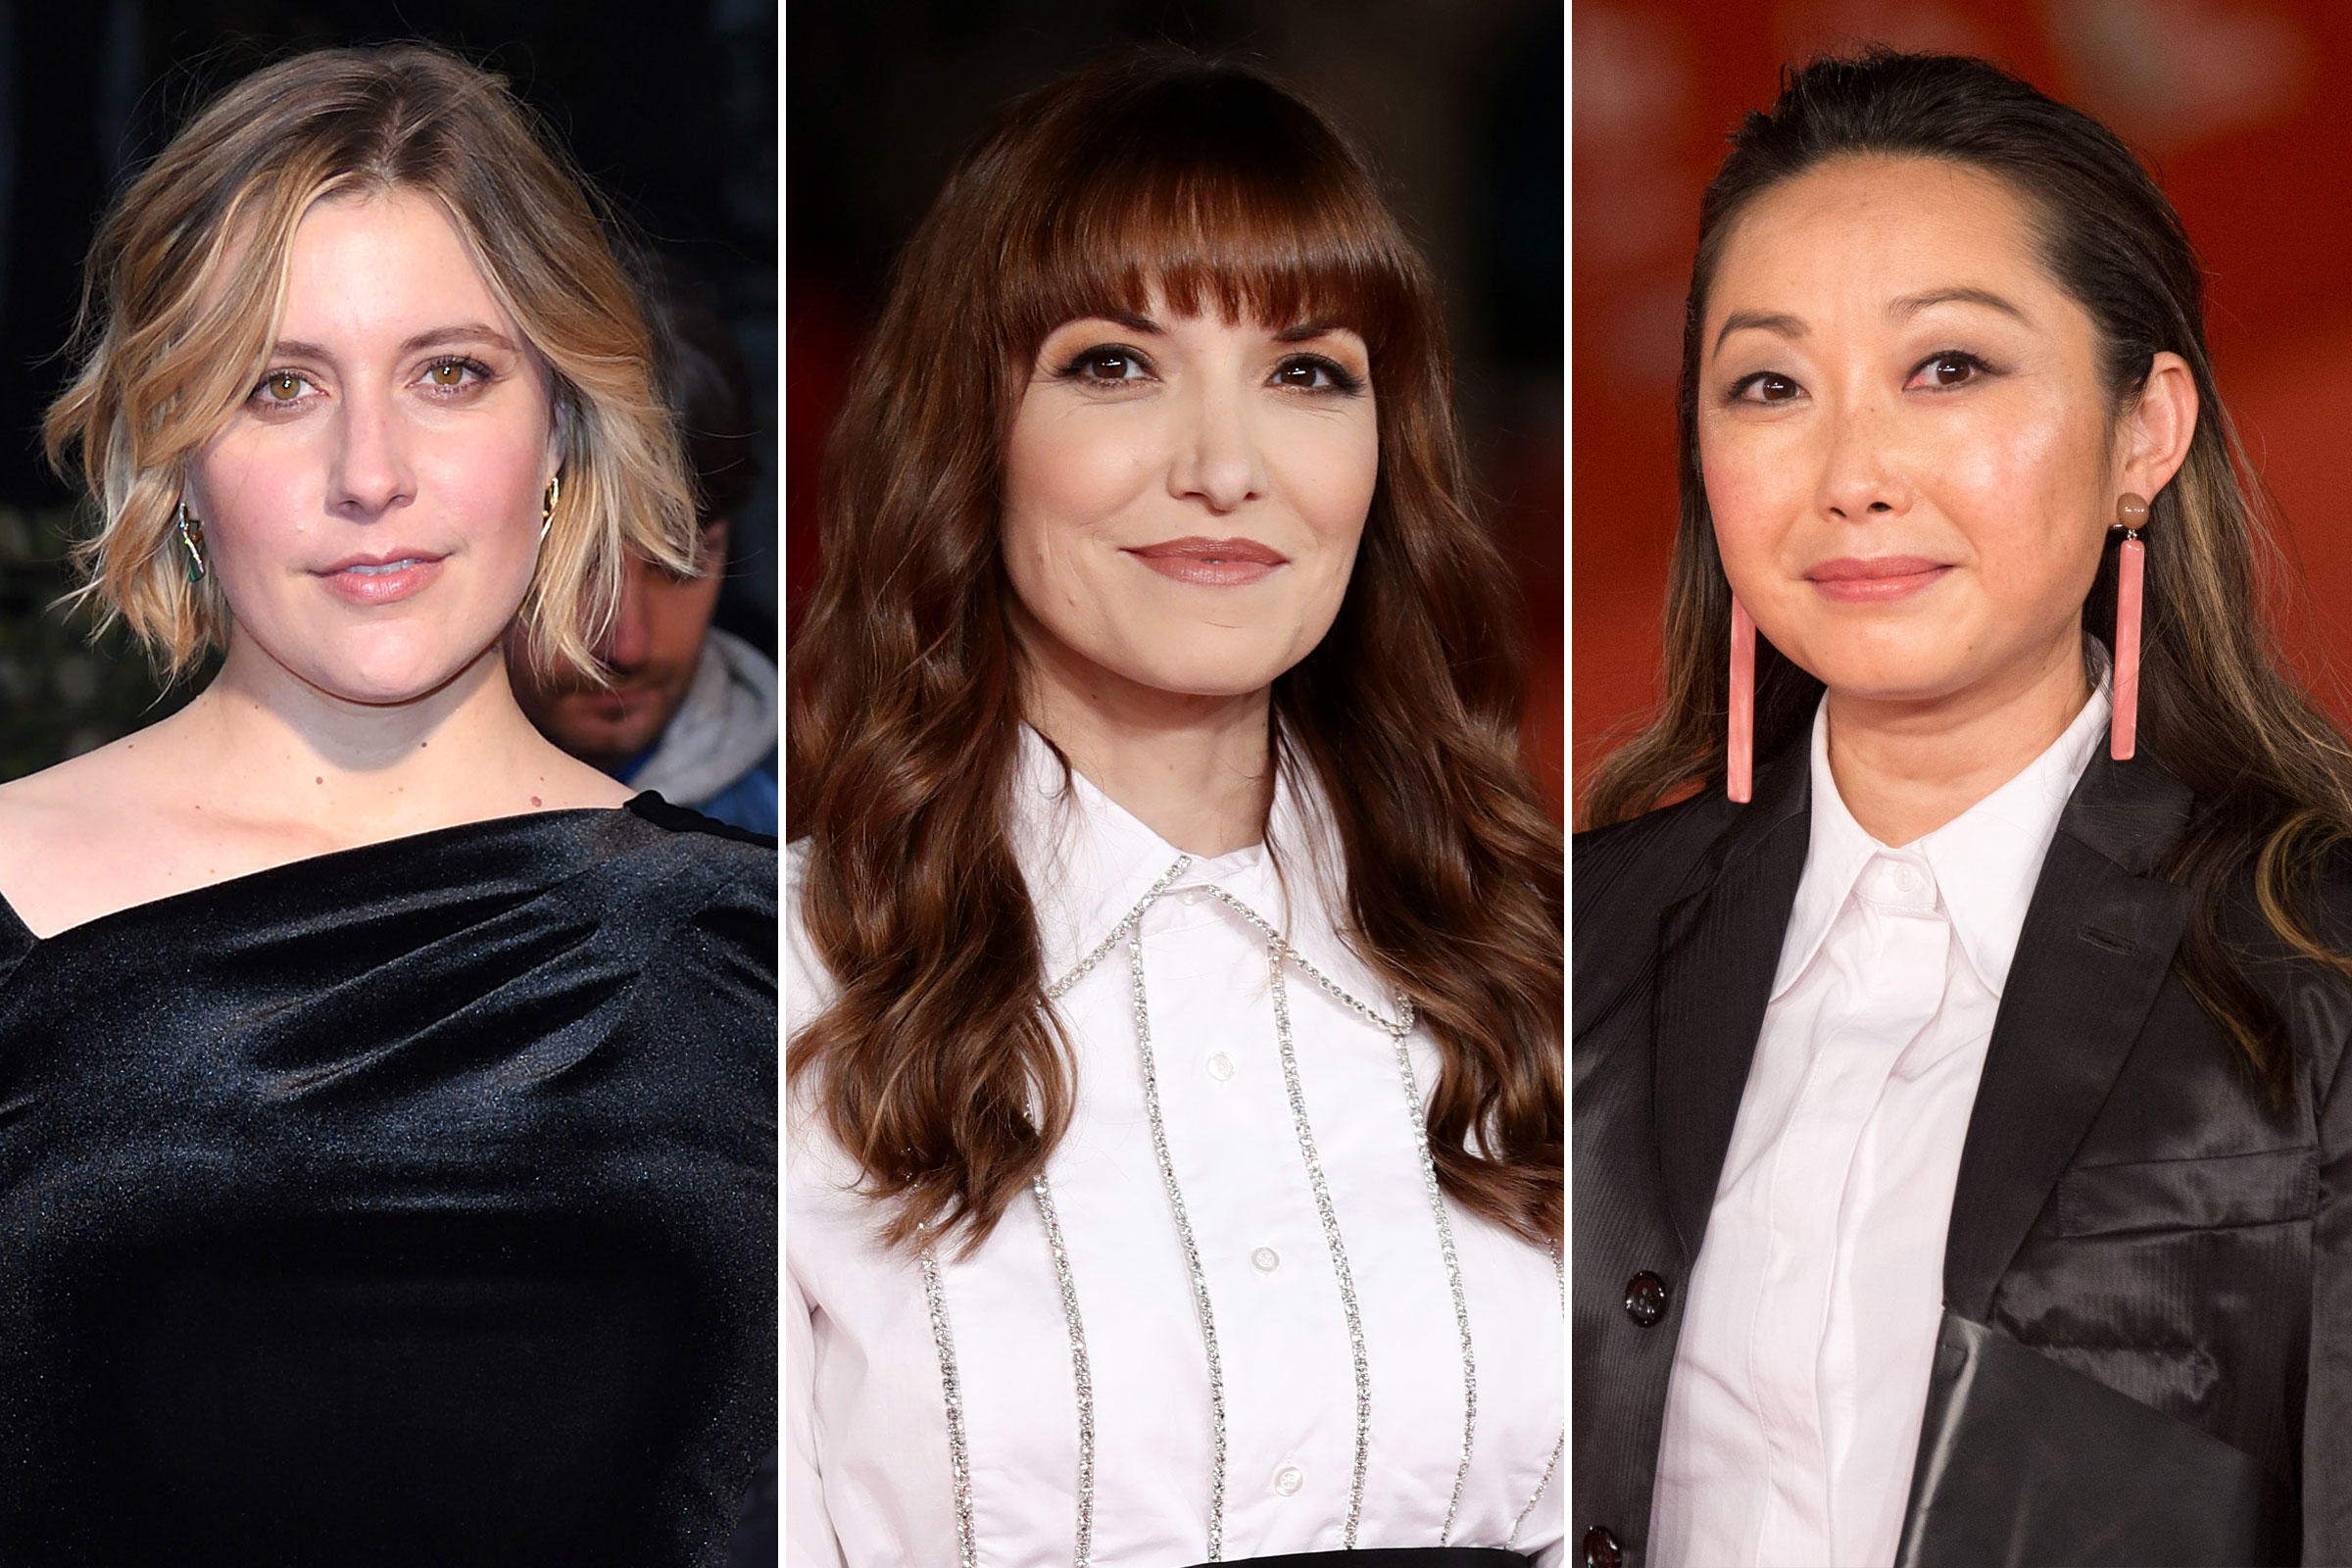 2019 has been a good year for women in film making, image via Entertainment Weekly